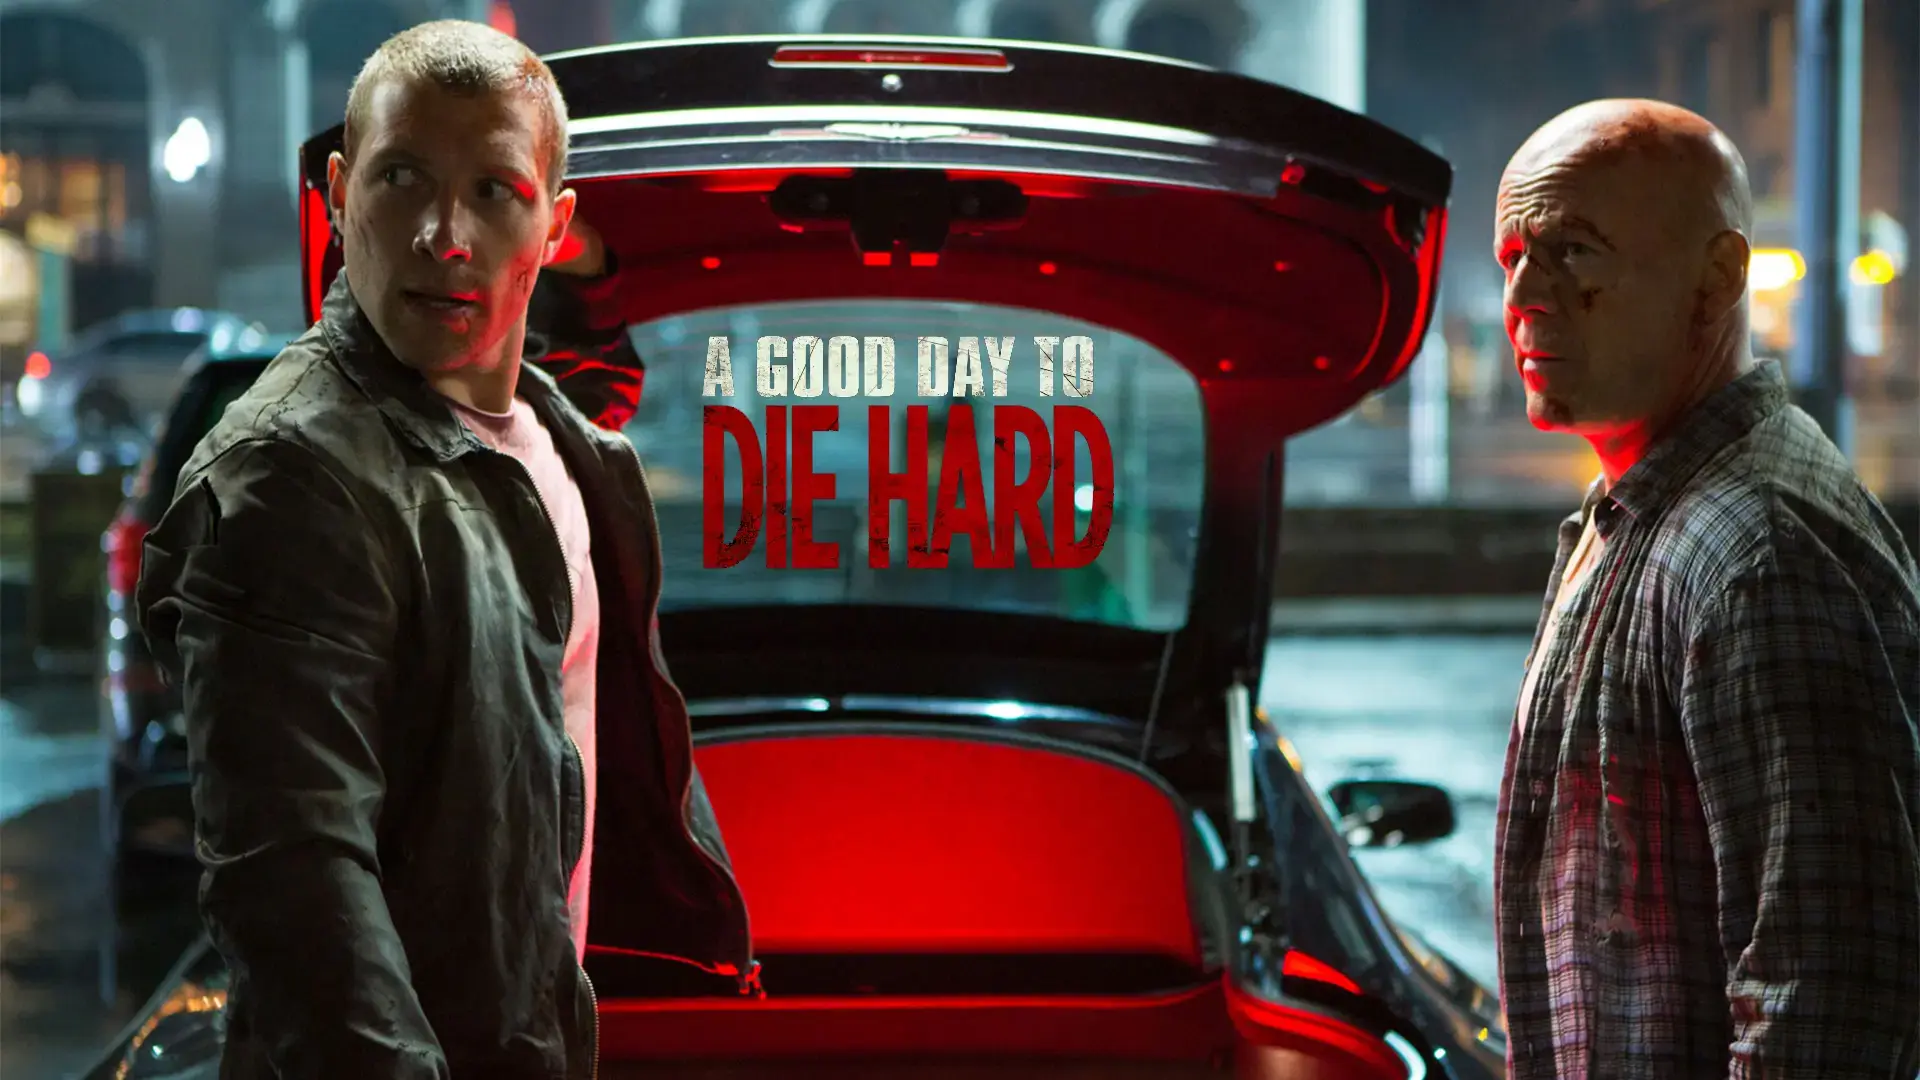 Movie A Good Day to Die Hard wallpaper 2 | Background Image